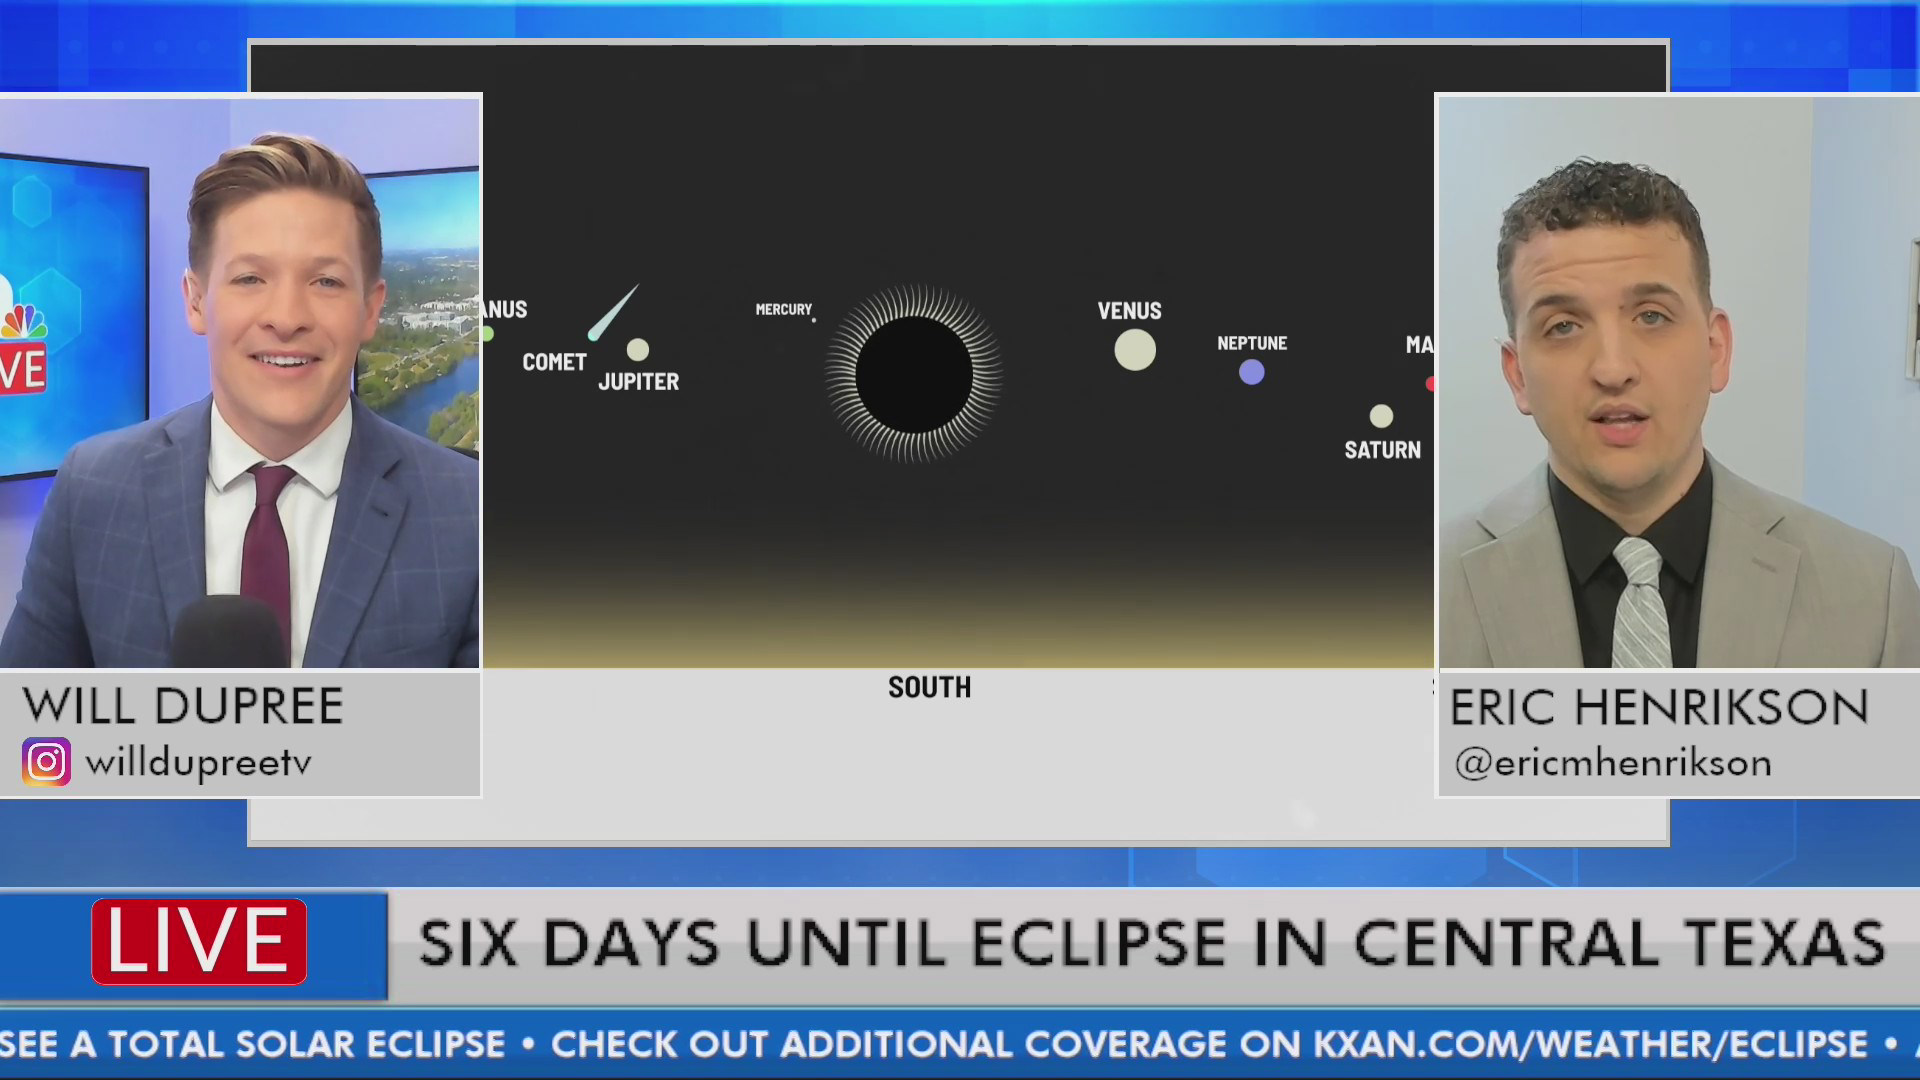 Six days until total solar eclipse in Central Texas